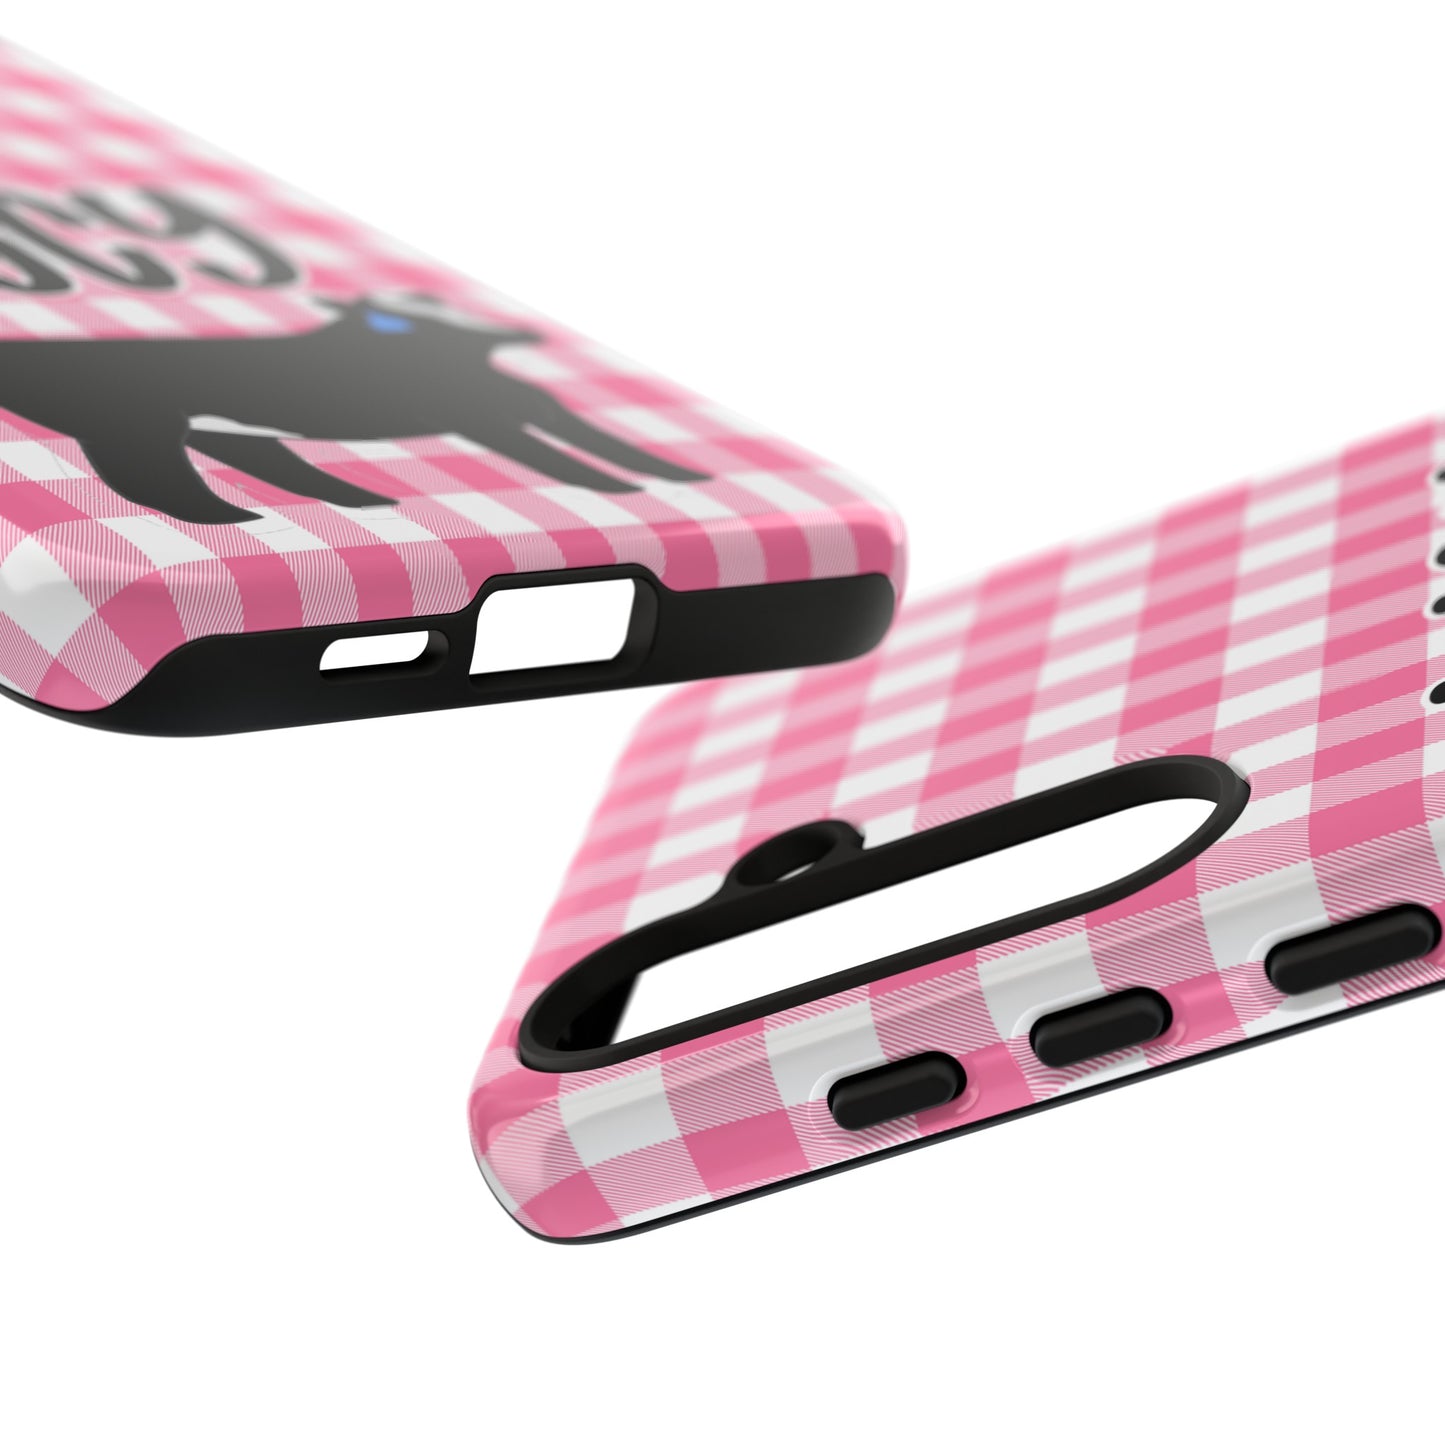 Livestock Show Cow Phone Cases - Show Heifer - Android Cow Phone Cases